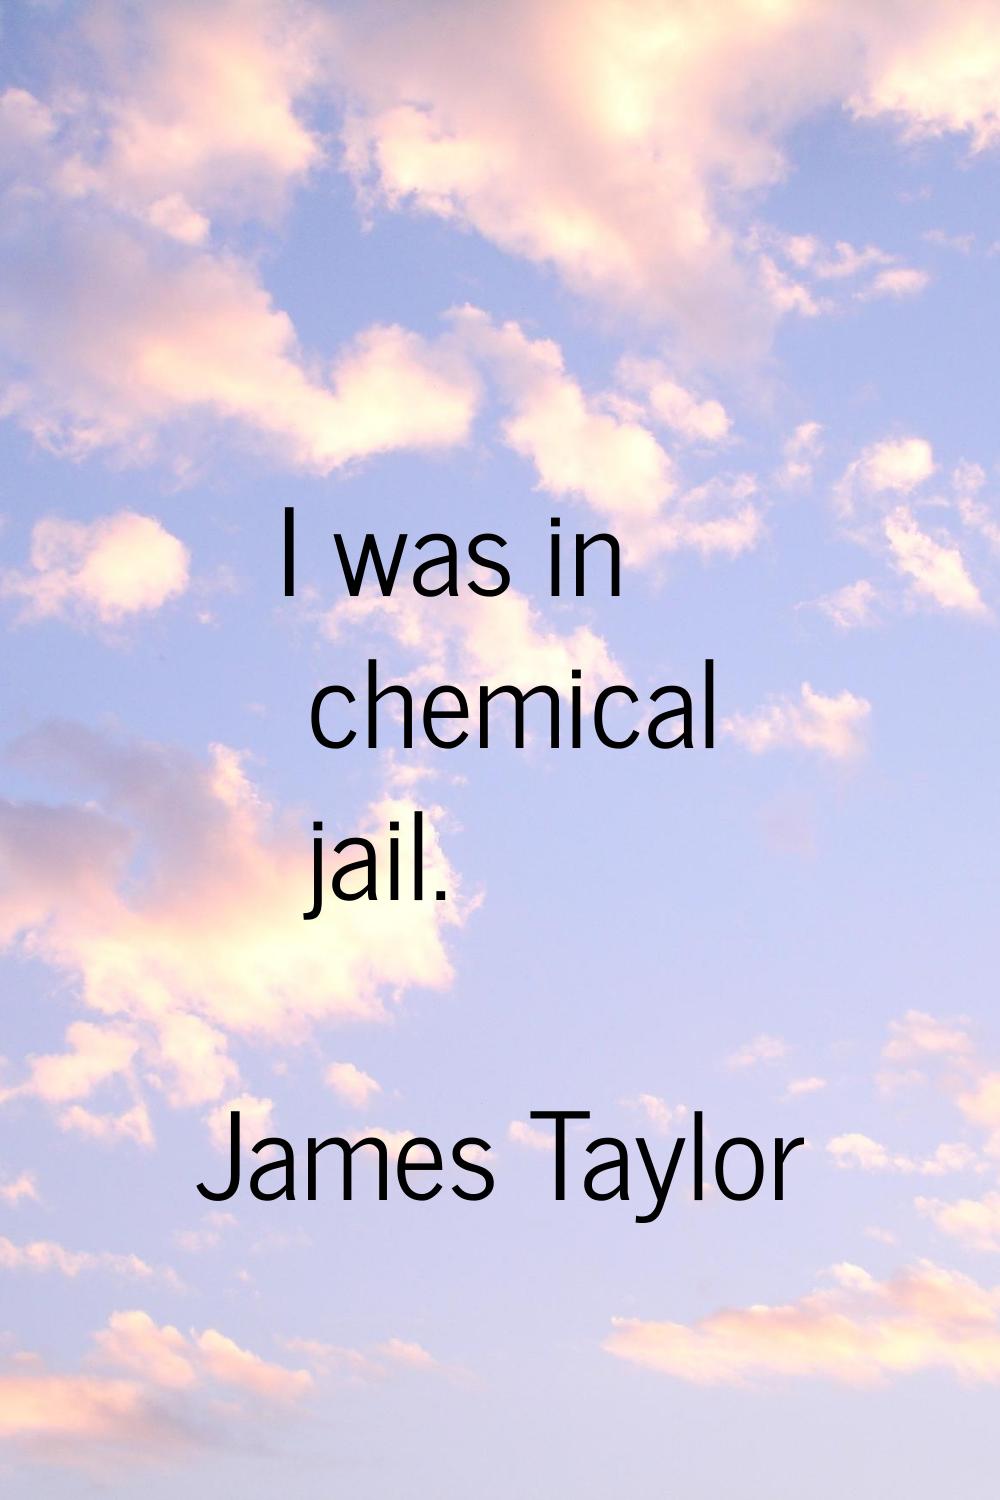 I was in chemical jail.